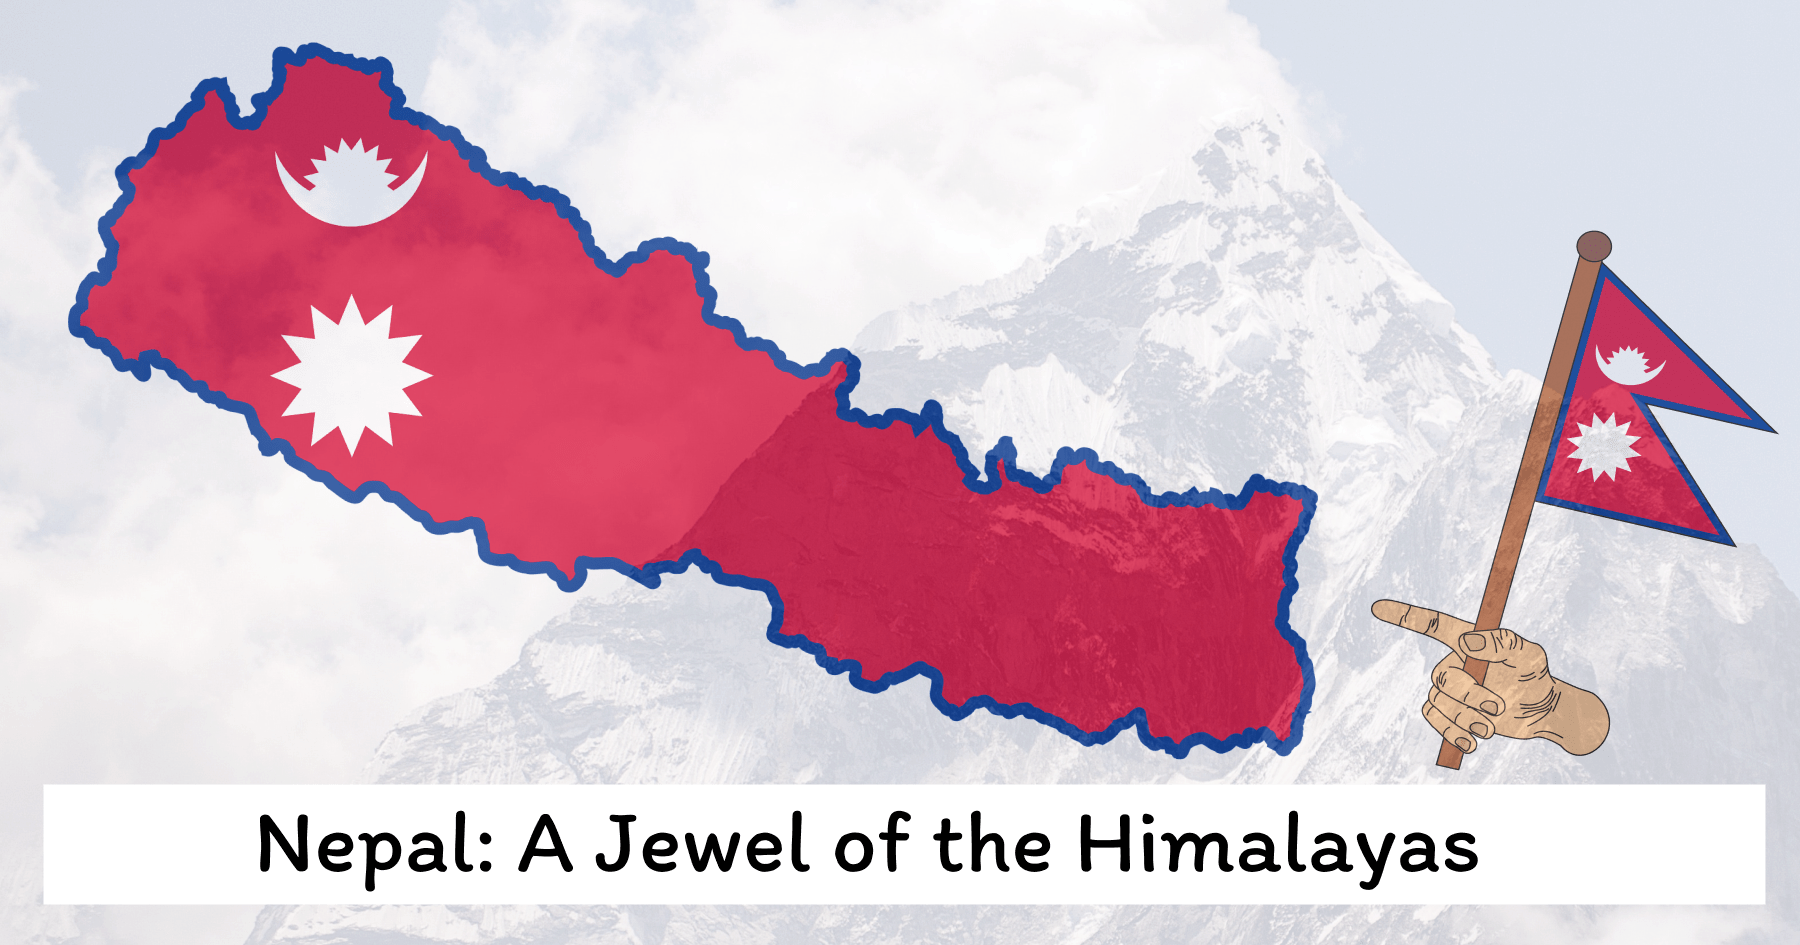 Beautiful view of Nepal's Himalayas with snow-capped peaks and beautiful valleys.